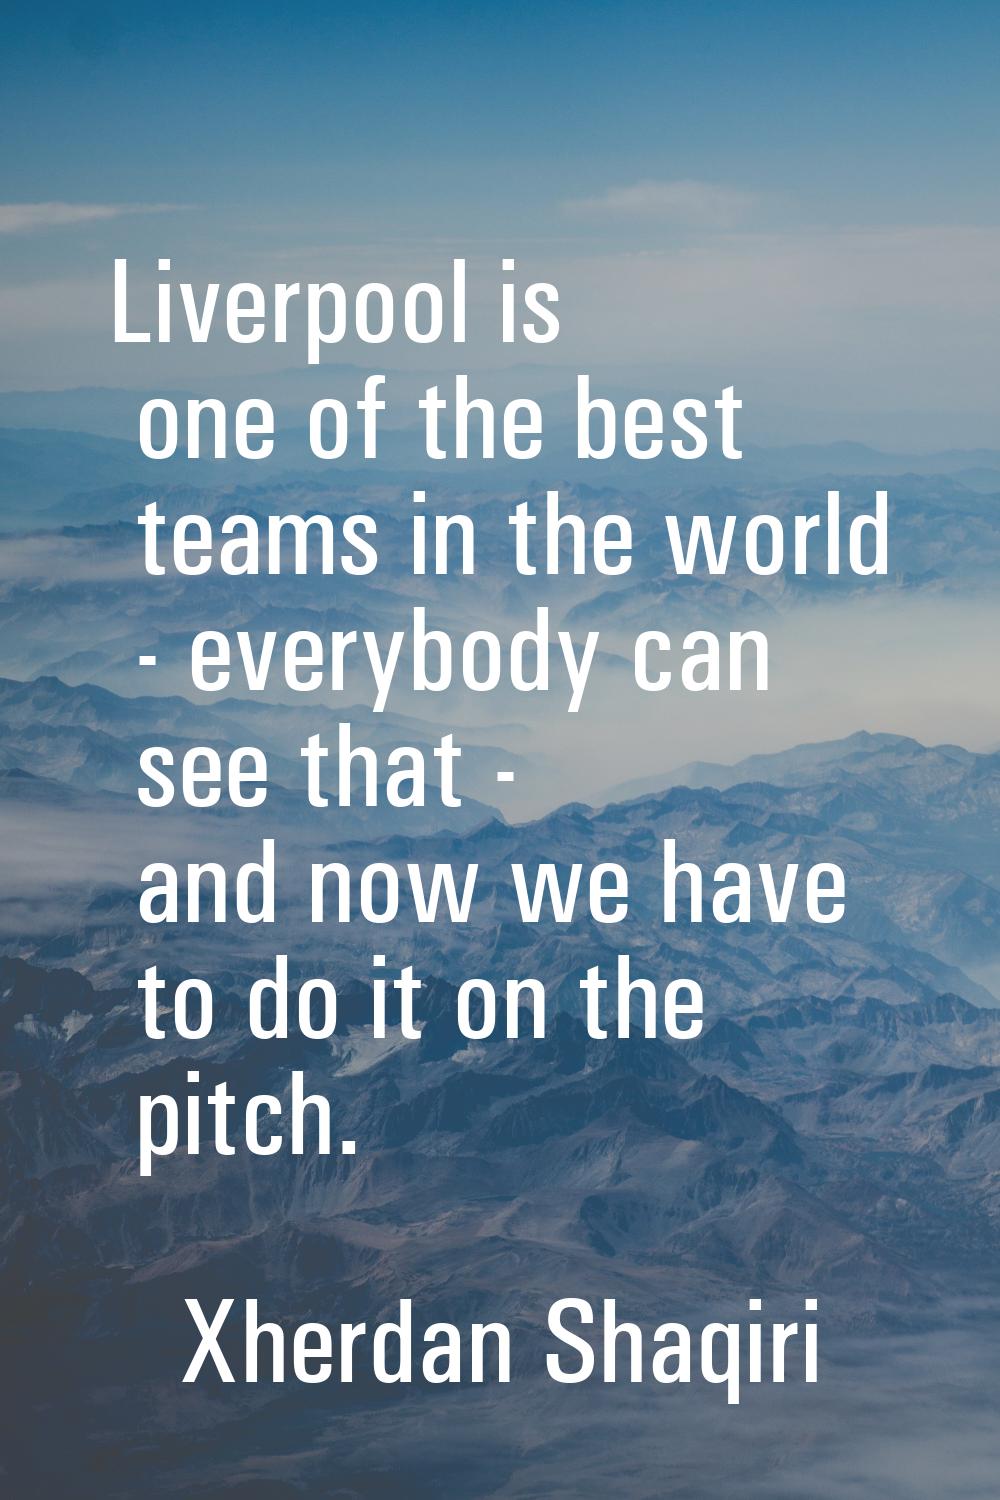 Liverpool is one of the best teams in the world - everybody can see that - and now we have to do it